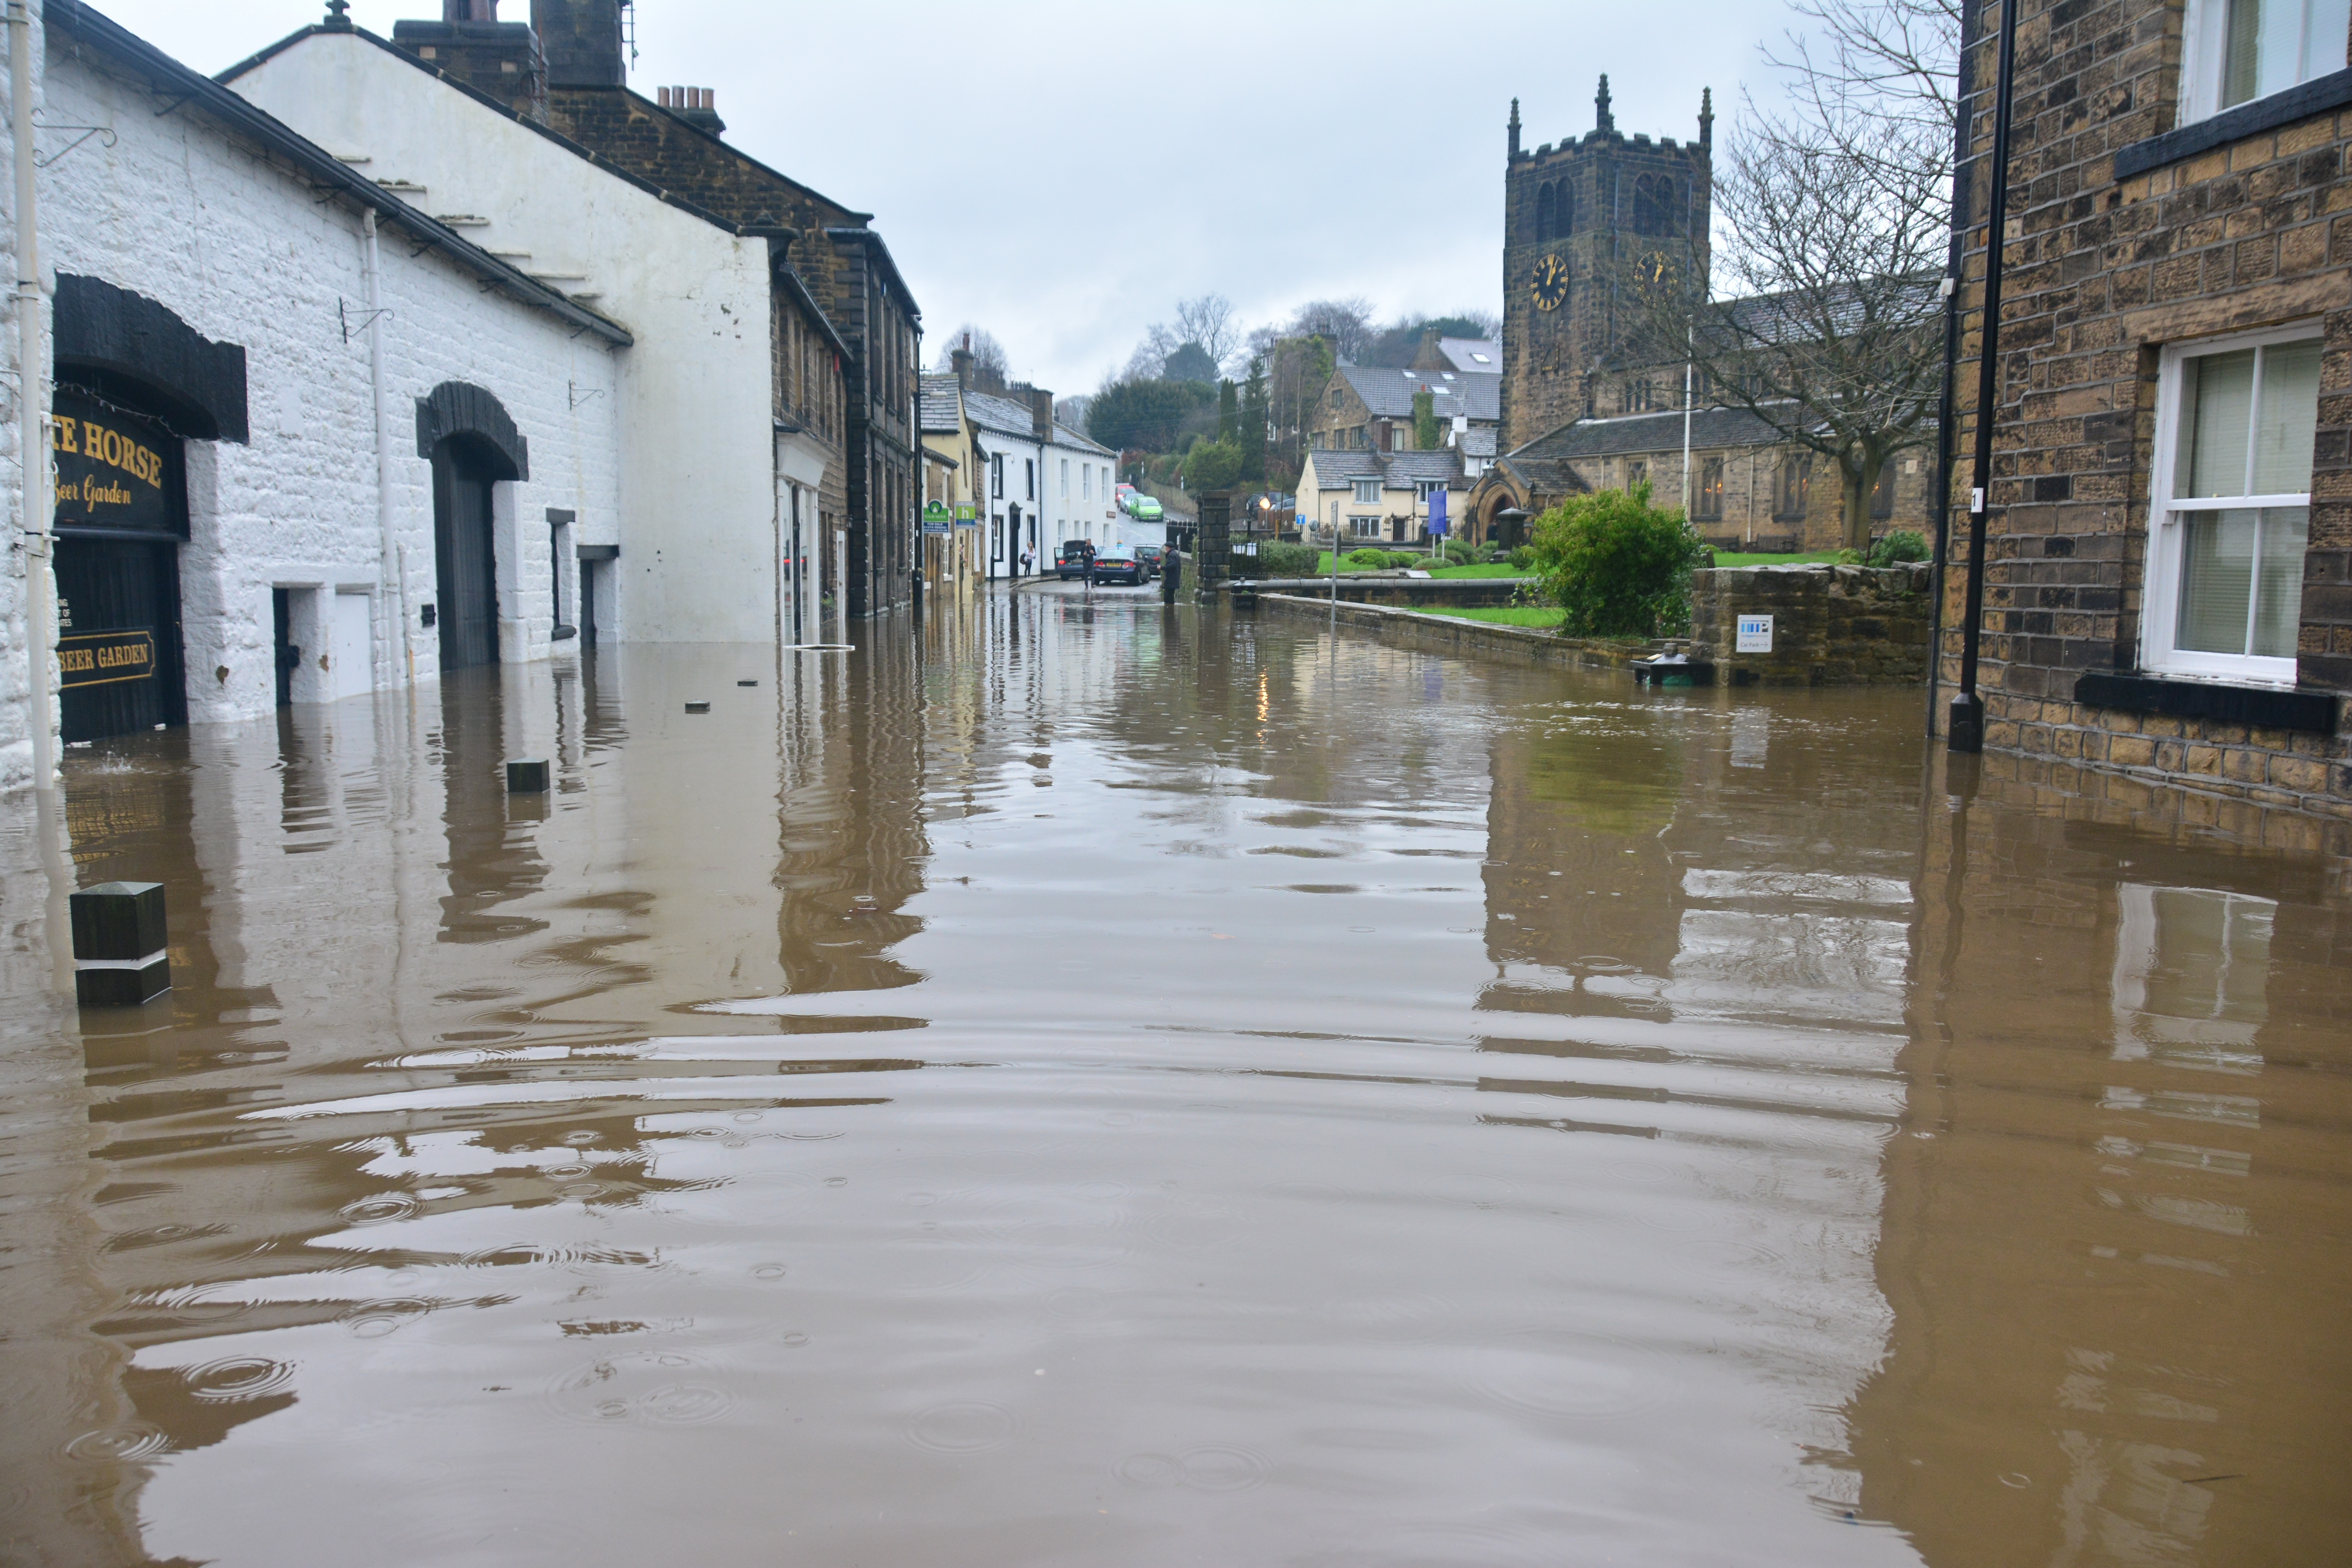 Flooded English Town: Photo by Chris Gallagher on Unsplash